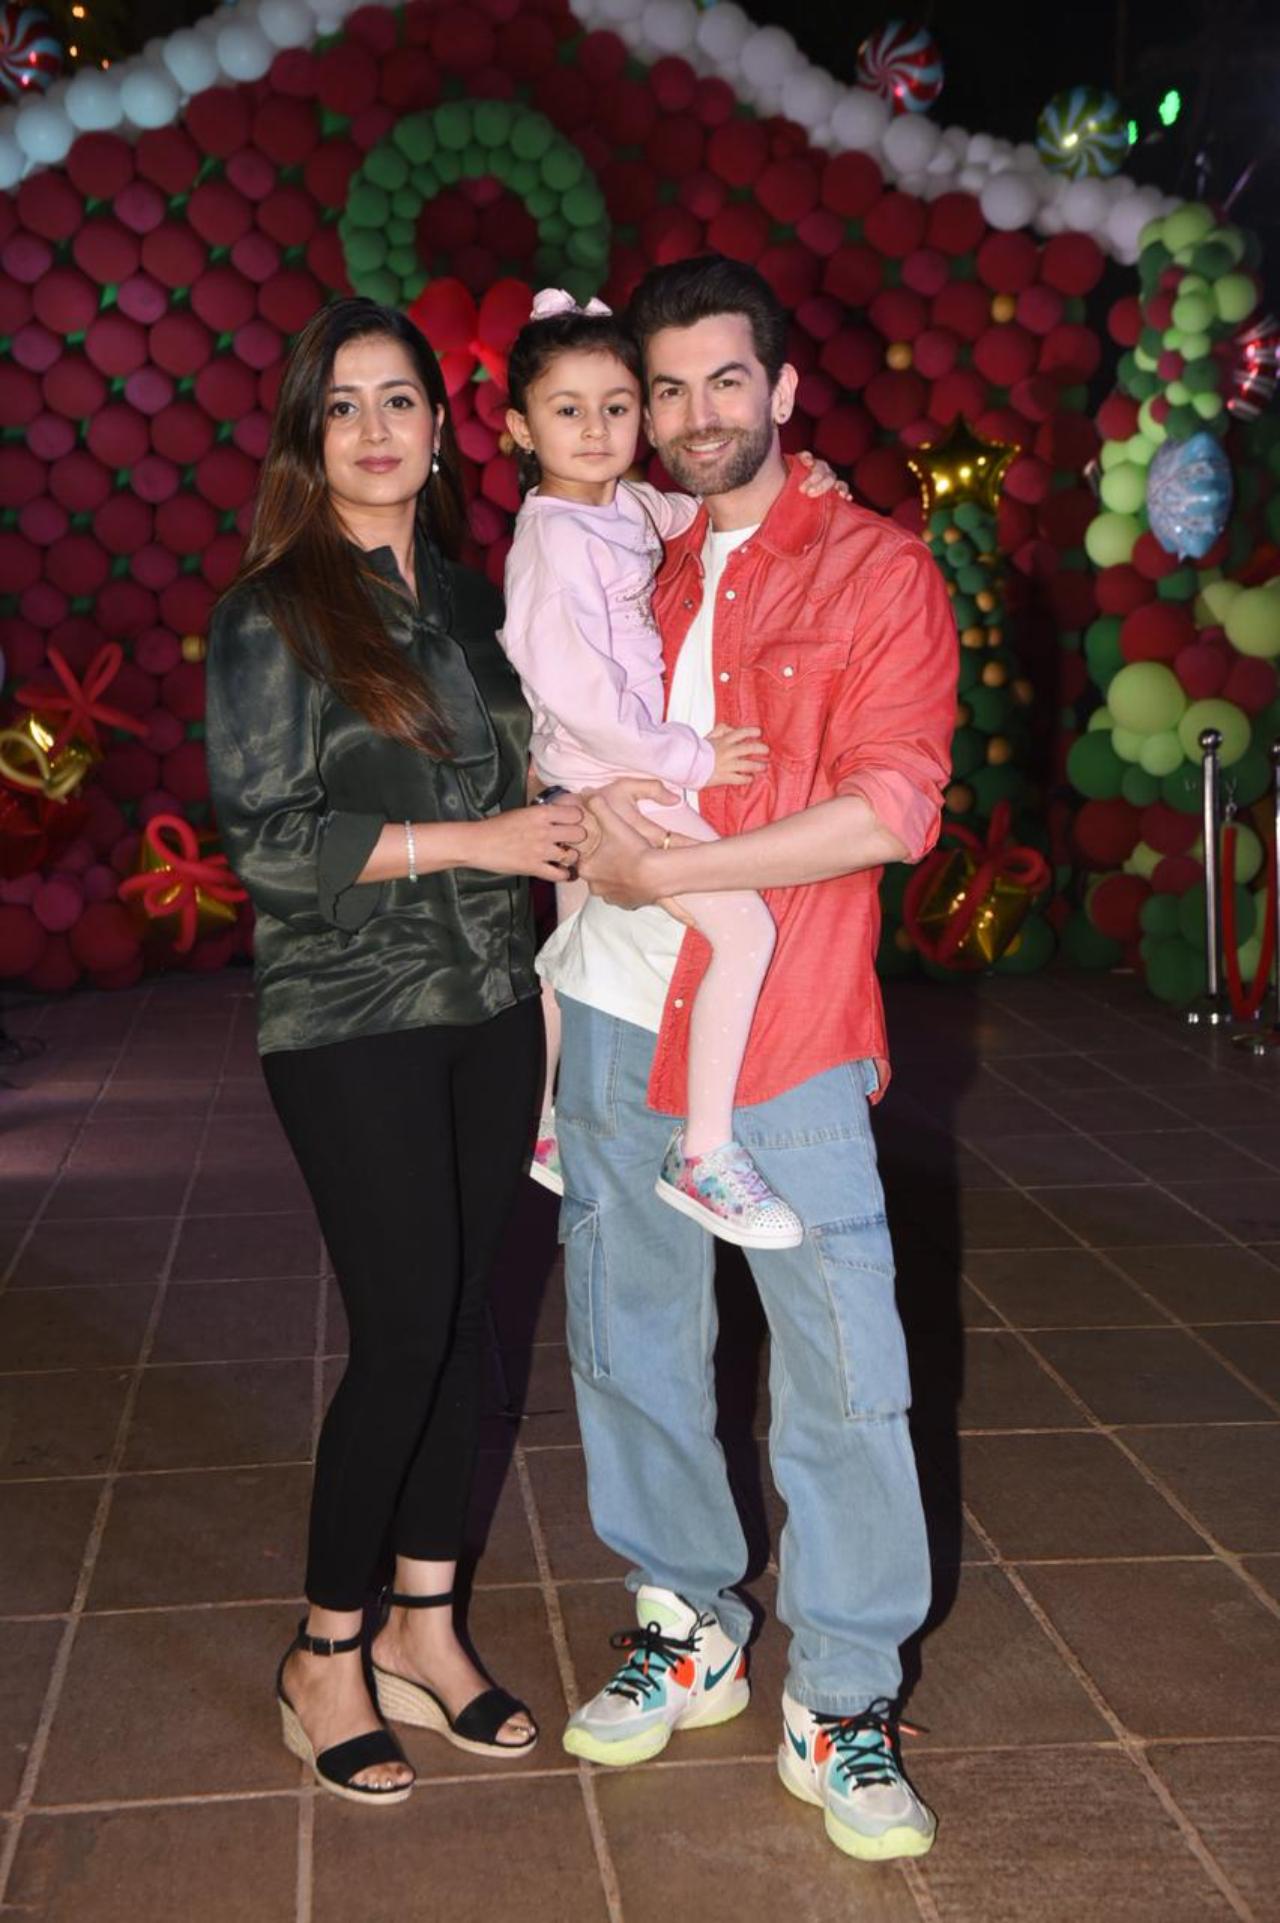 Actor Neil Nitin Mukesh opted for a red shirt over a white shirt and blue jeans. He arrived at the party along with his wife Rukmini Sahay and daughter Nurvi